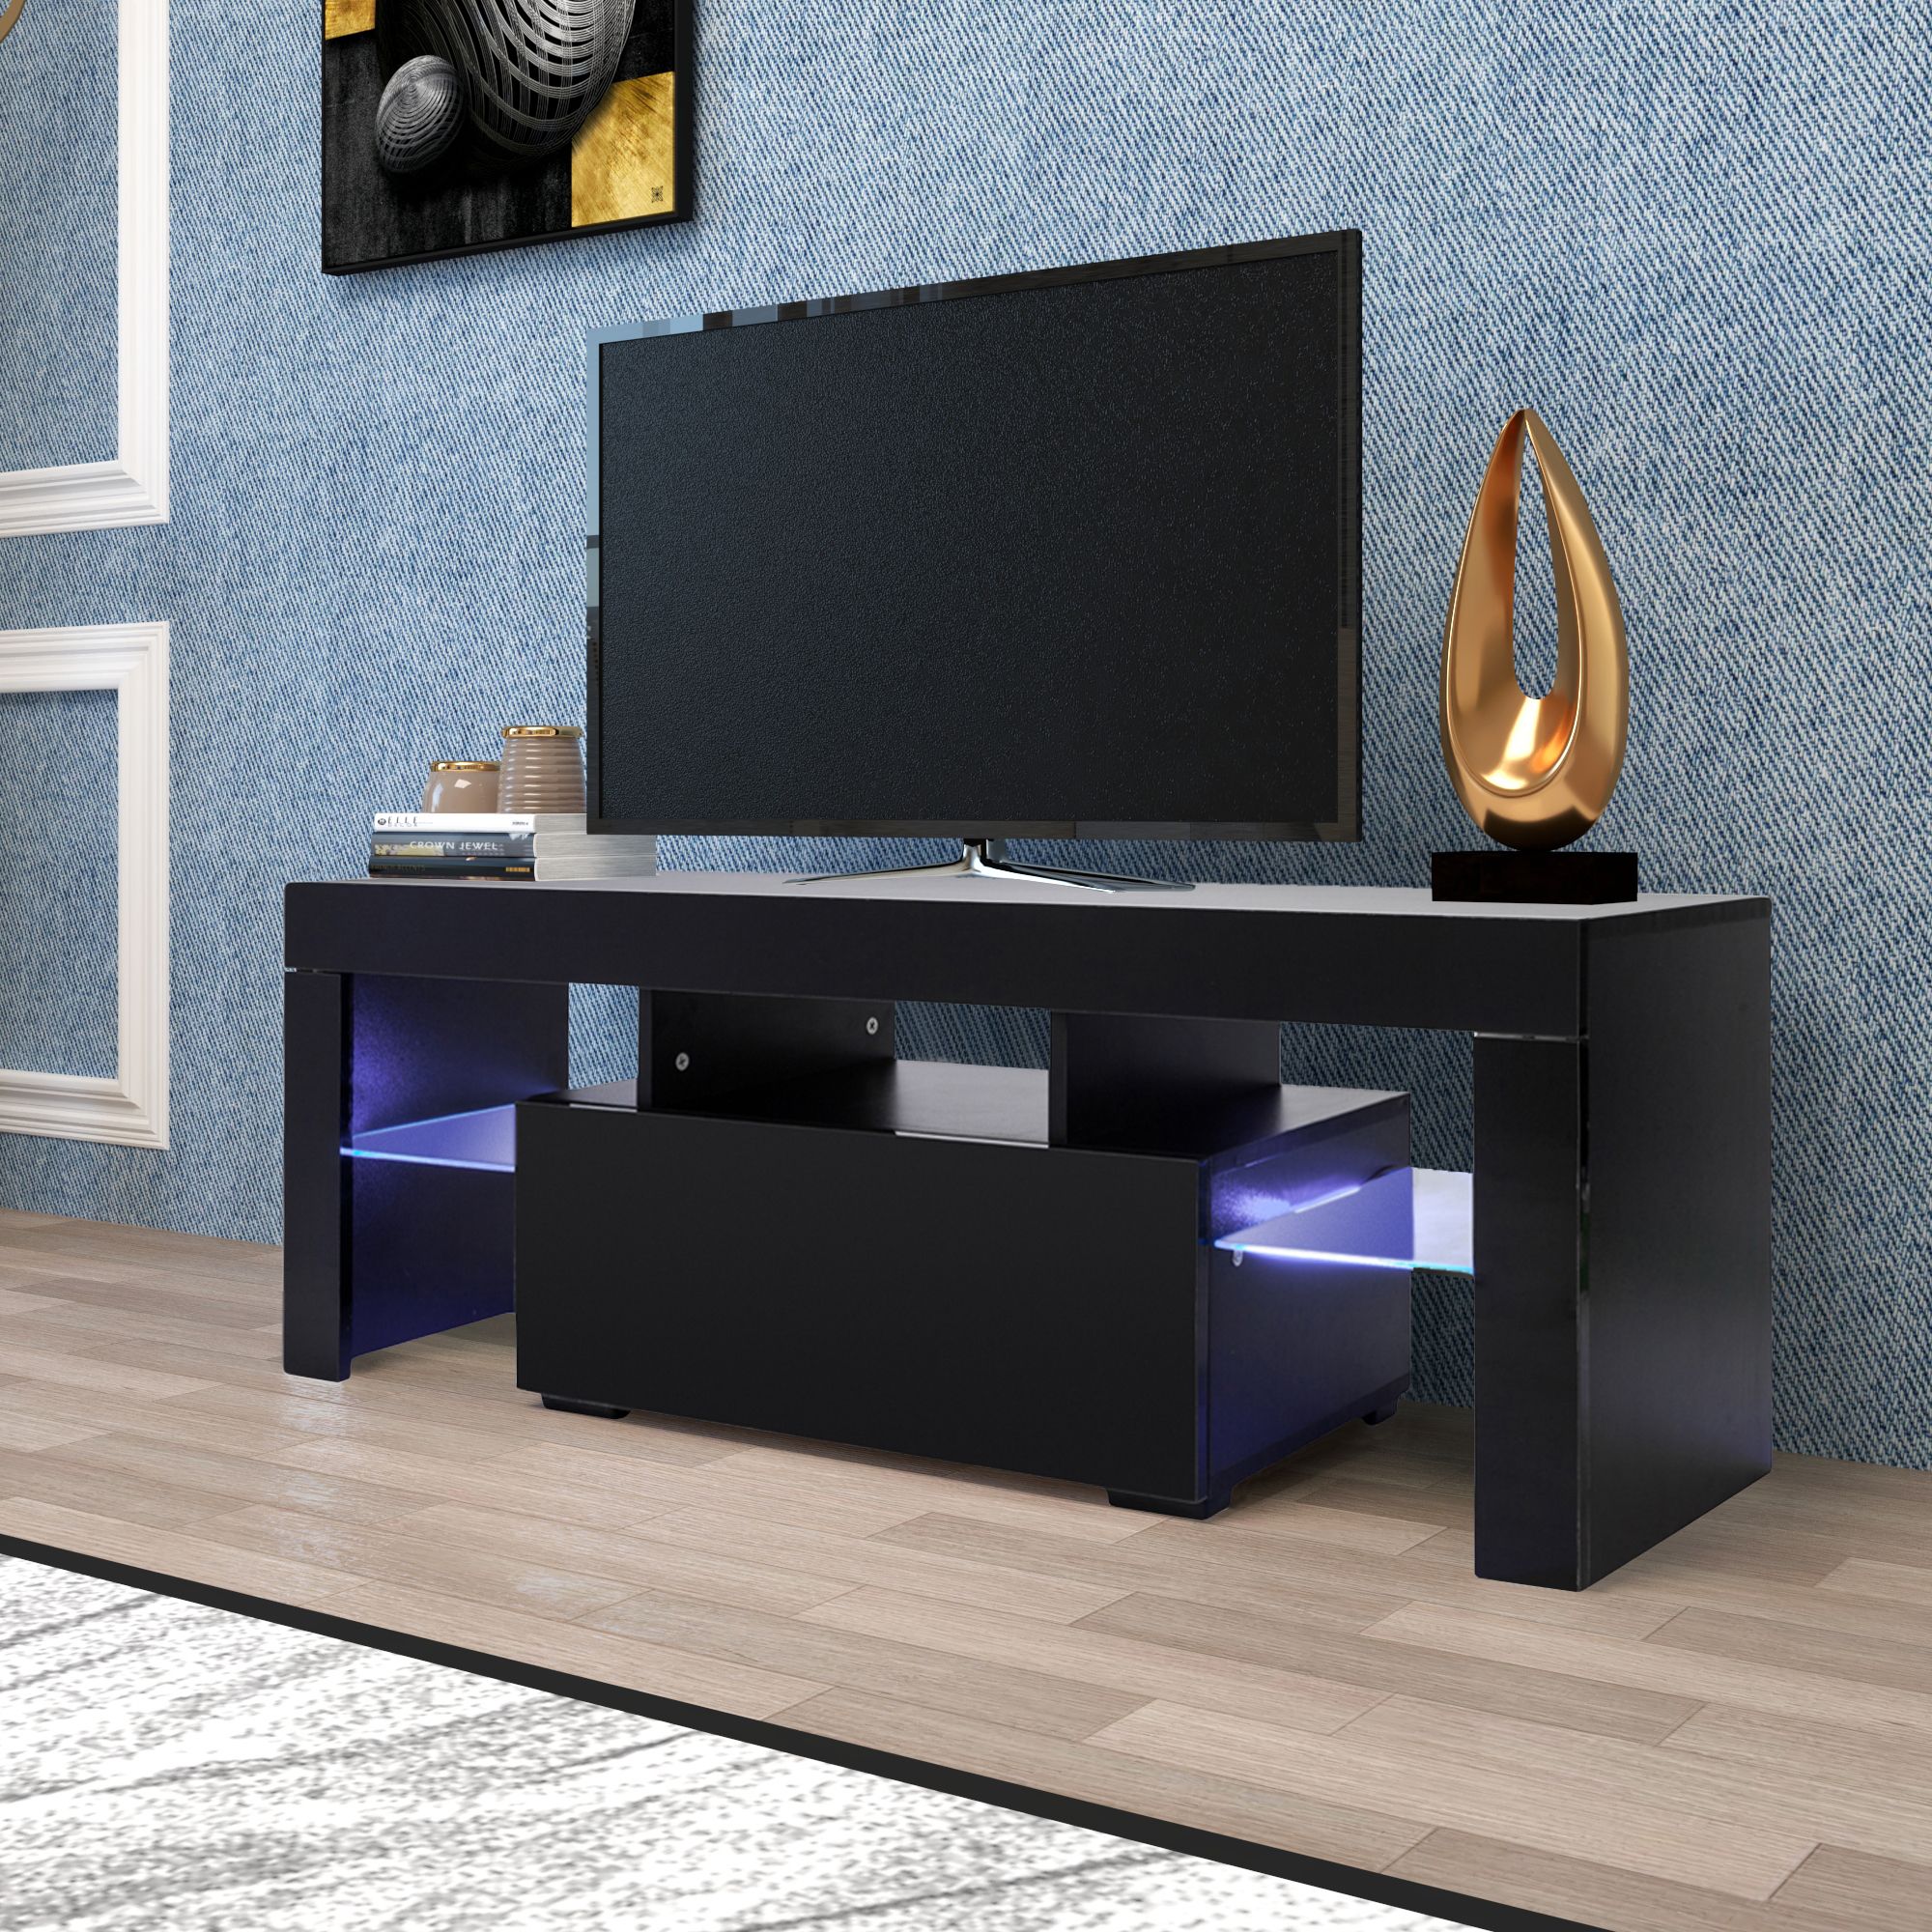 Entertainment Centers And Tv Stands, Yofe Tv Stand With Inside Tabletop Tv Stand (View 6 of 15)